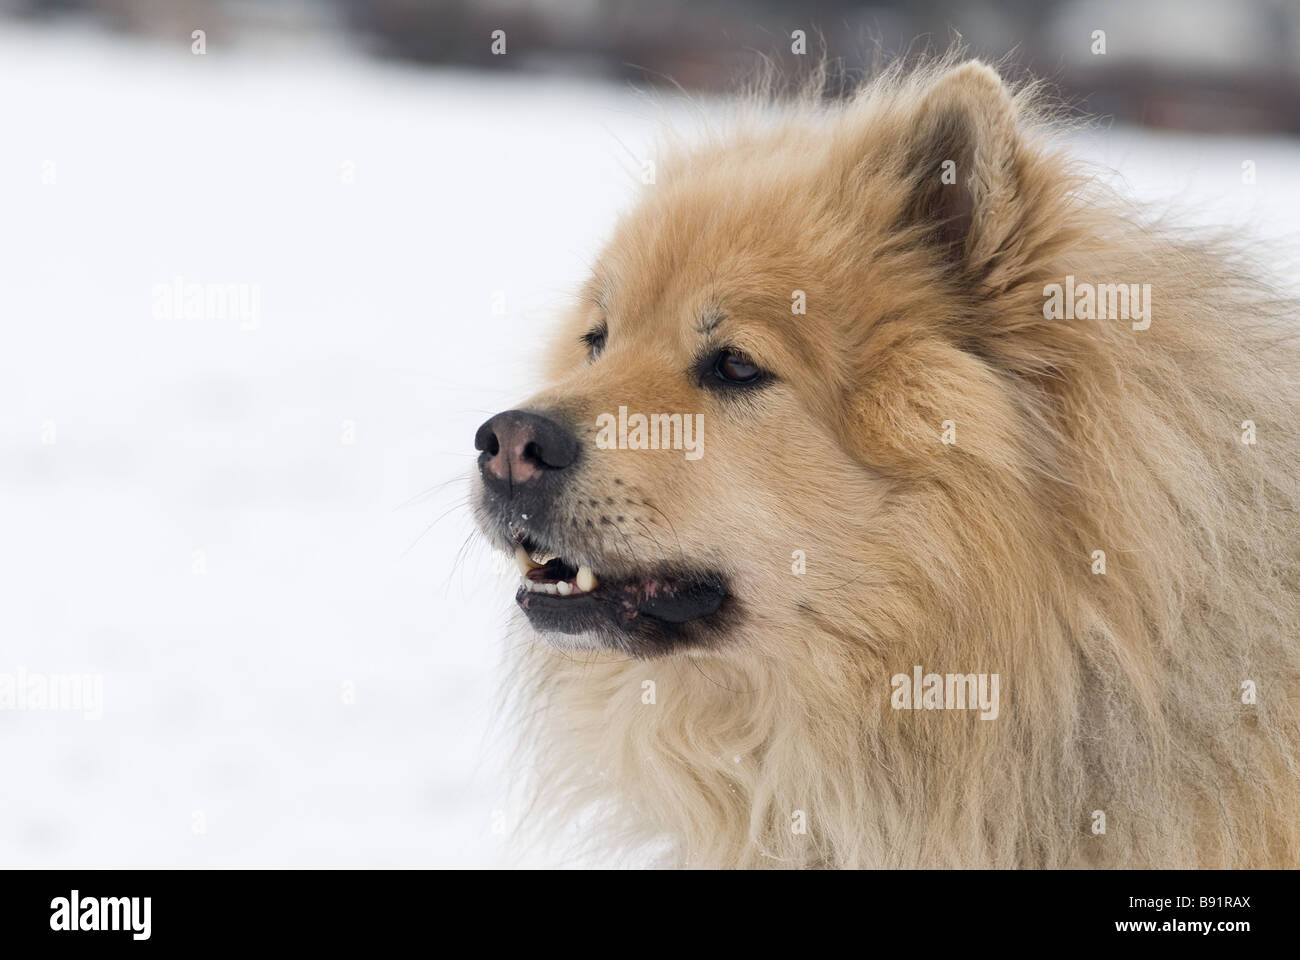 a cheeky looking brown eurasier dog with his mouth open on a snowy background Stock Photo